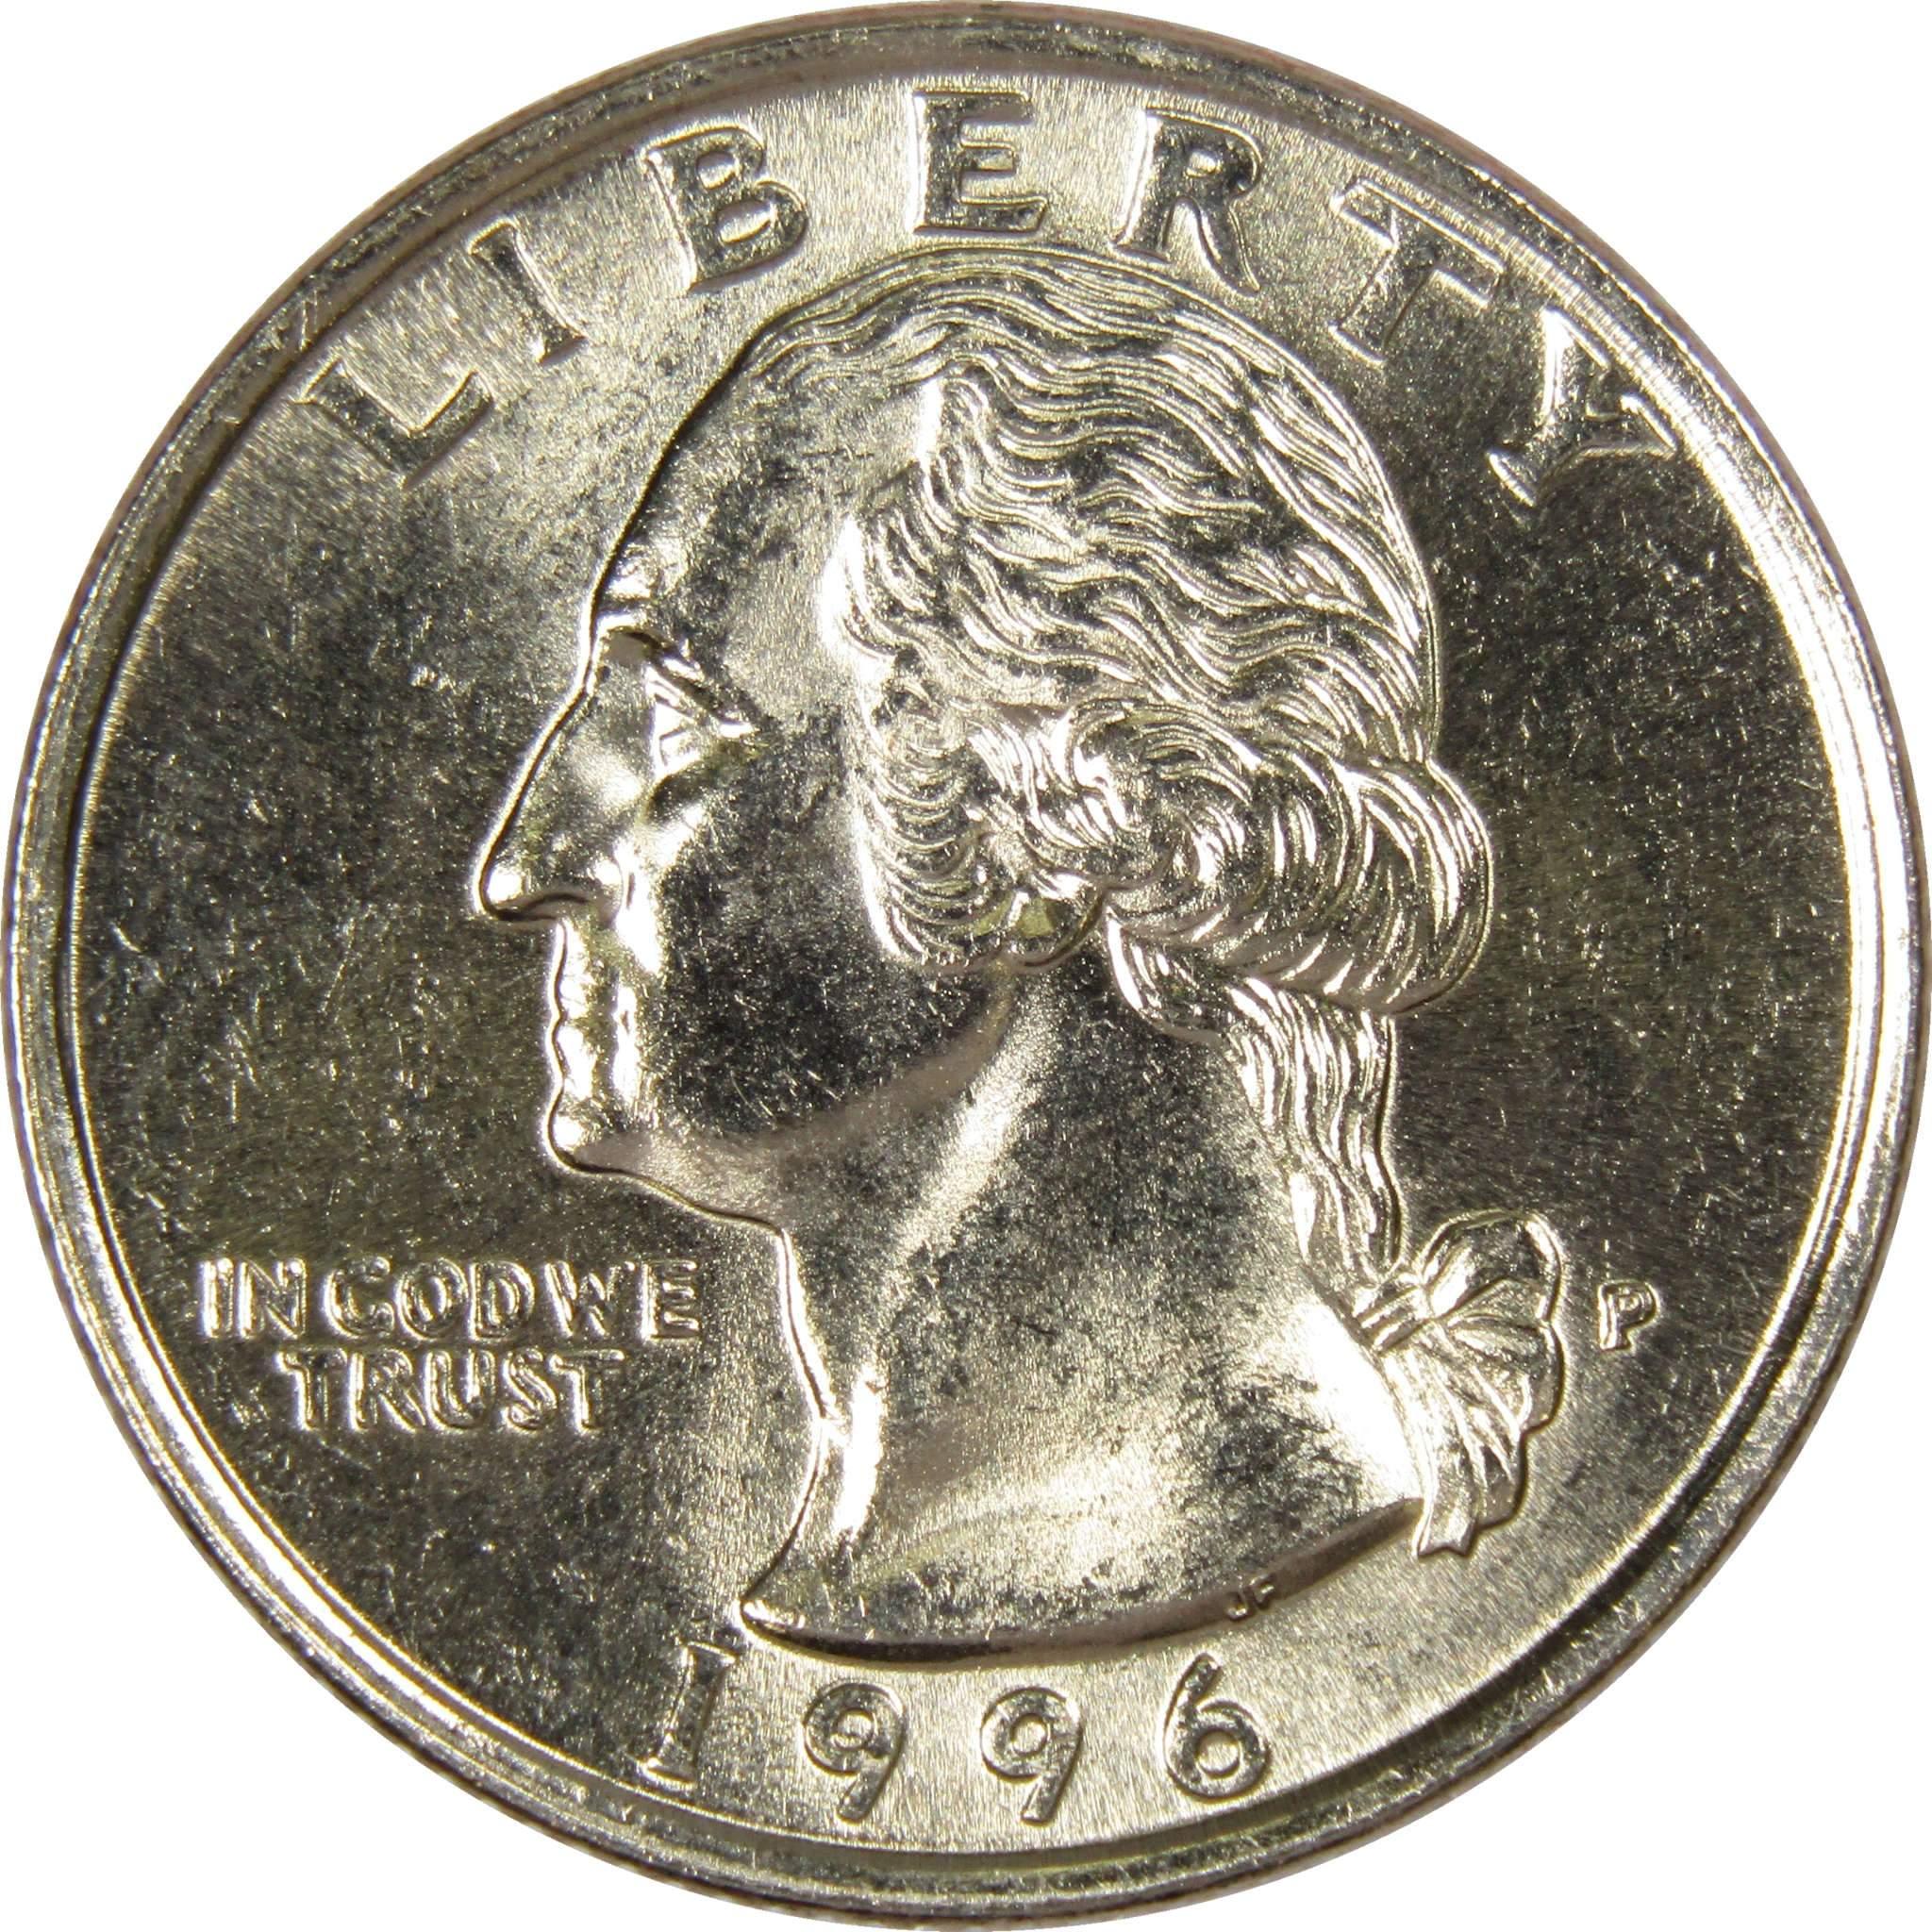 1996 P Washington Quarter BU Uncirculated Mint State 25c US Coin Collectible